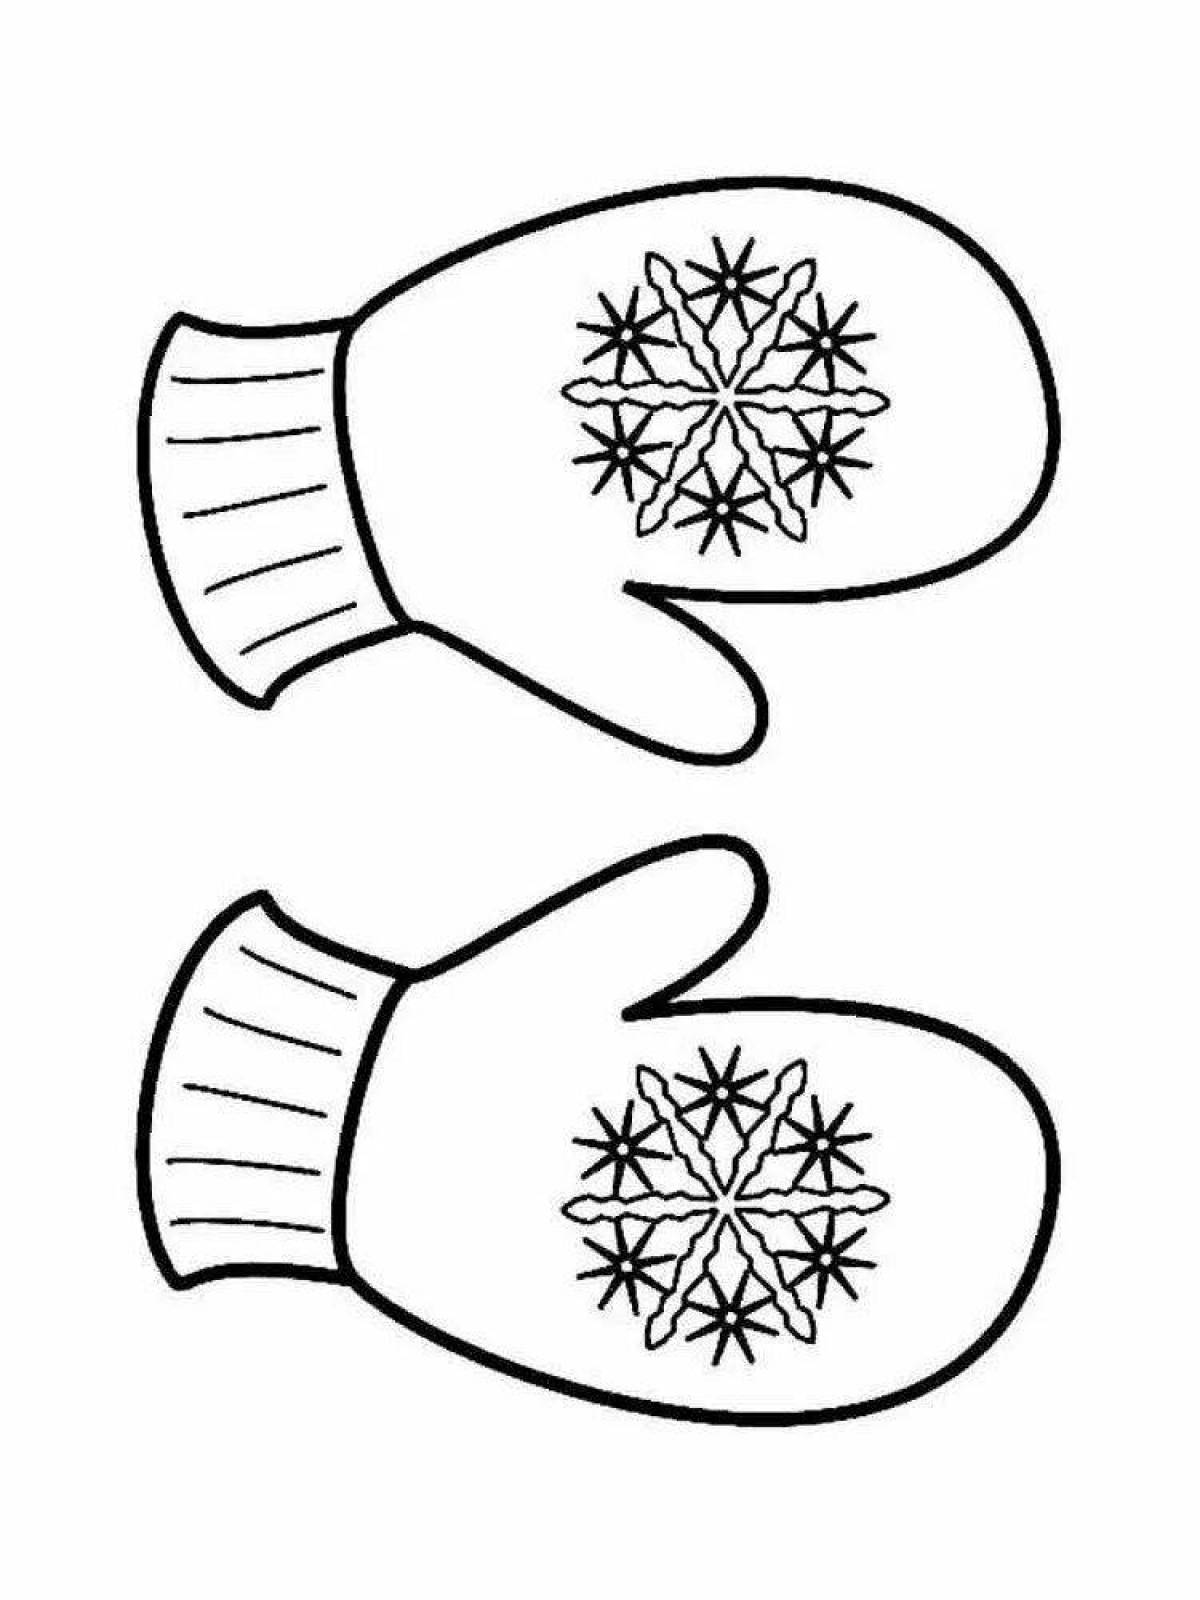 Charming mitten coloring book